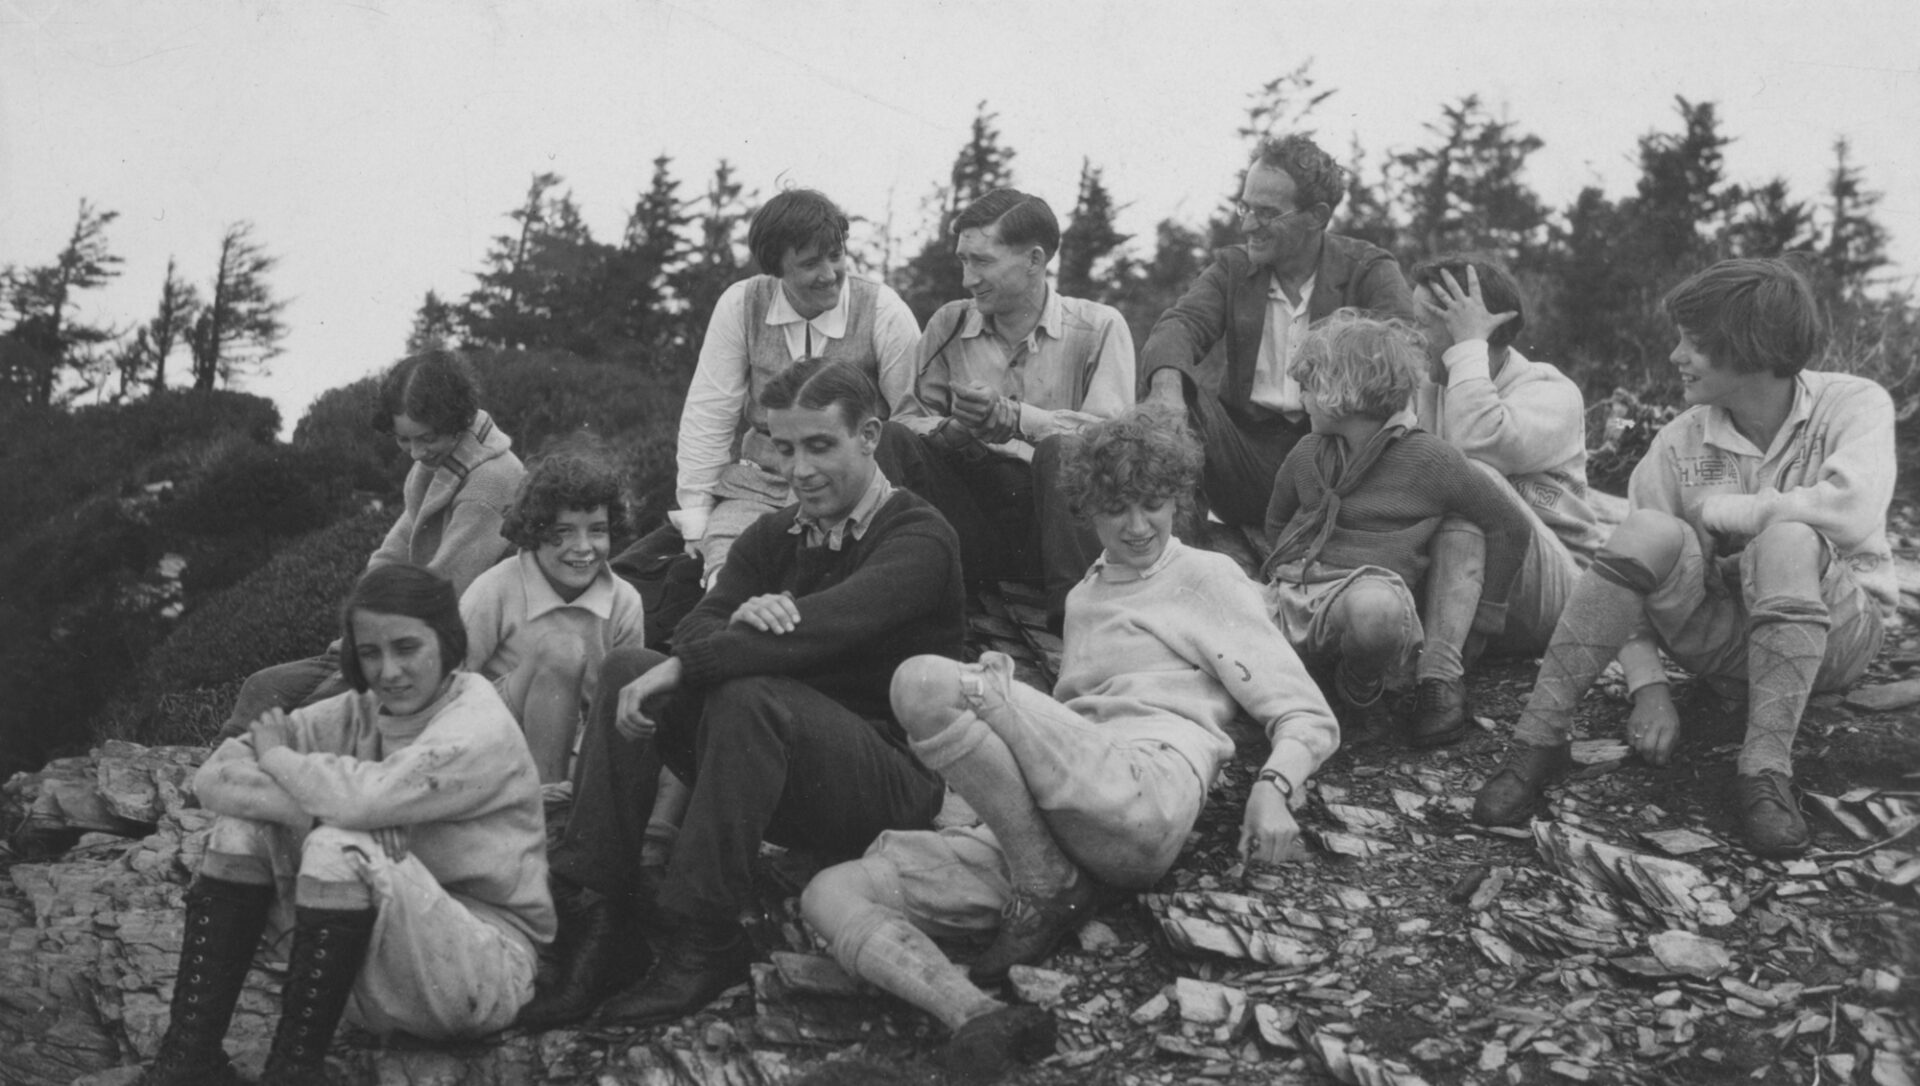 Harvey Broome and Harry Ijams (back row) and the Ijams family on Mt Le Conte, 1927. Photograph taken by Carlos Campbell. (Ijams family collection.)